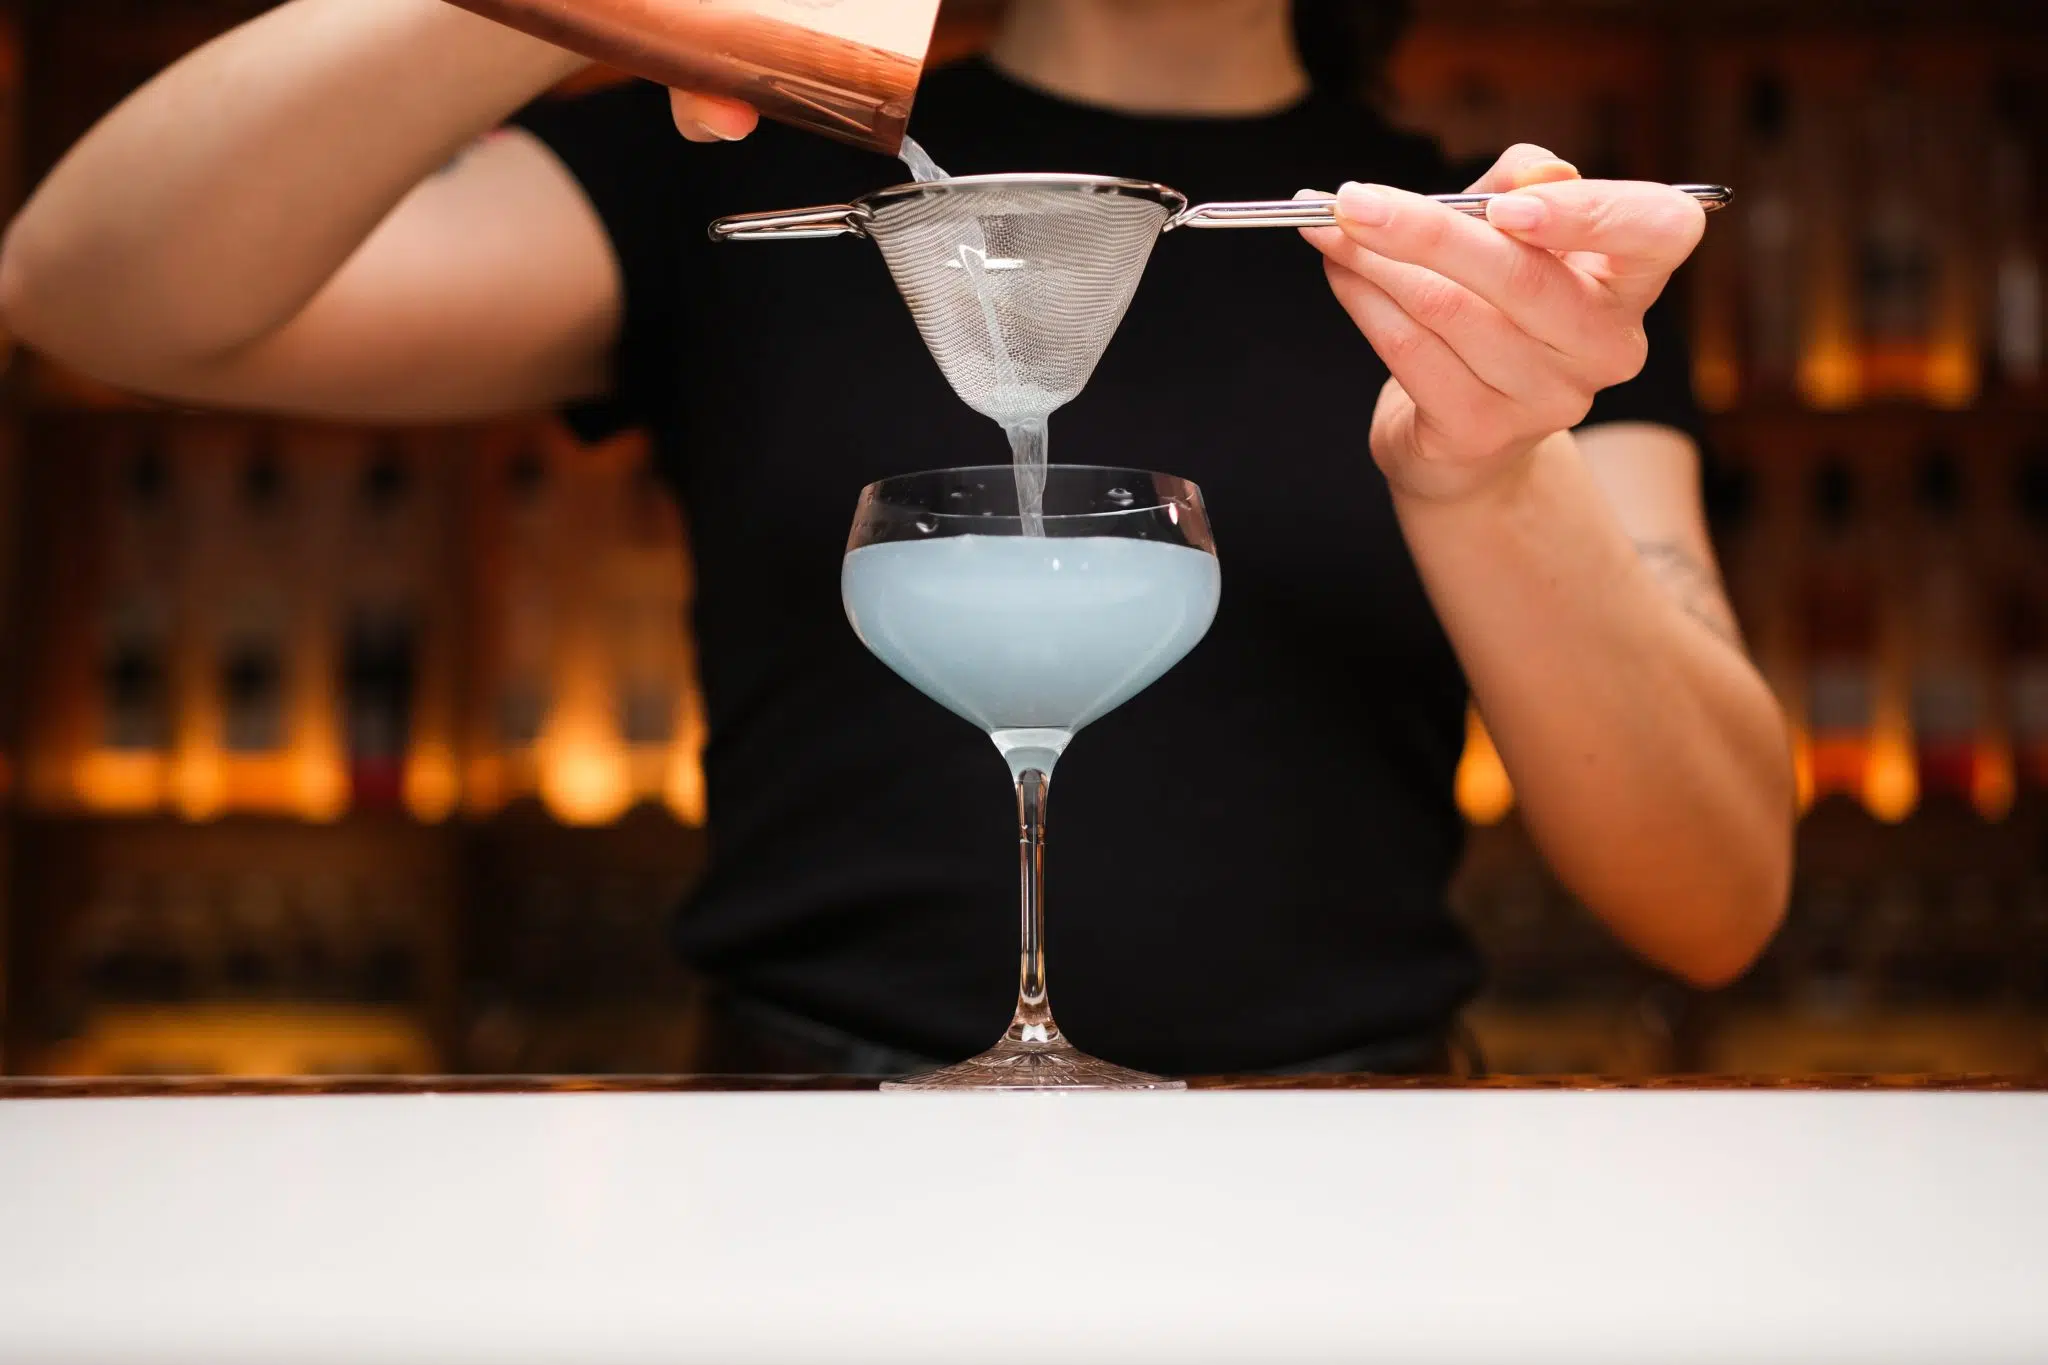 <p>Strain the mixture into your empty and chilled coupe glass. Straining will remove the ice and any pulp, leaving a smooth cocktail in your glass.</p>
